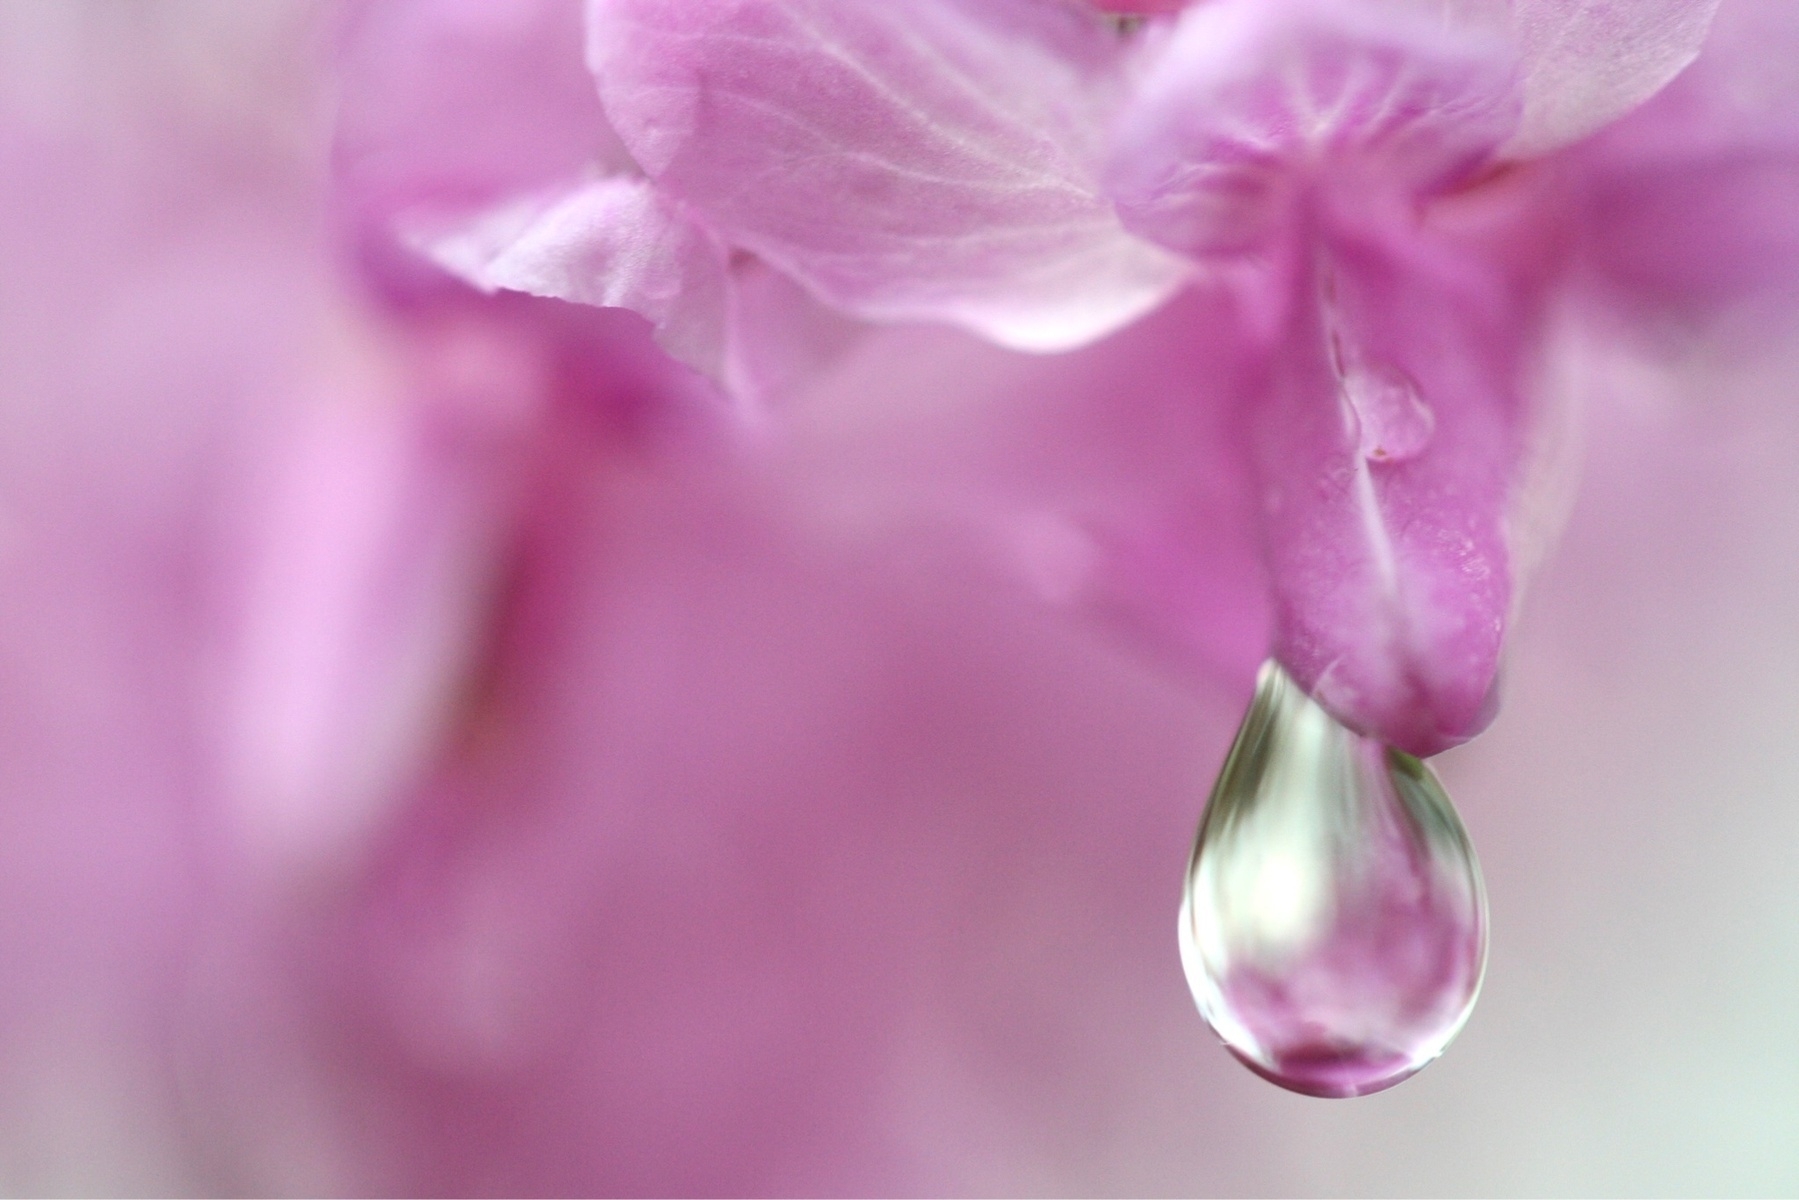 Extreme close-up macro of a pink flower with a water droplet hanging from the central lobe. A very shallow depth of field creates a painted effect.